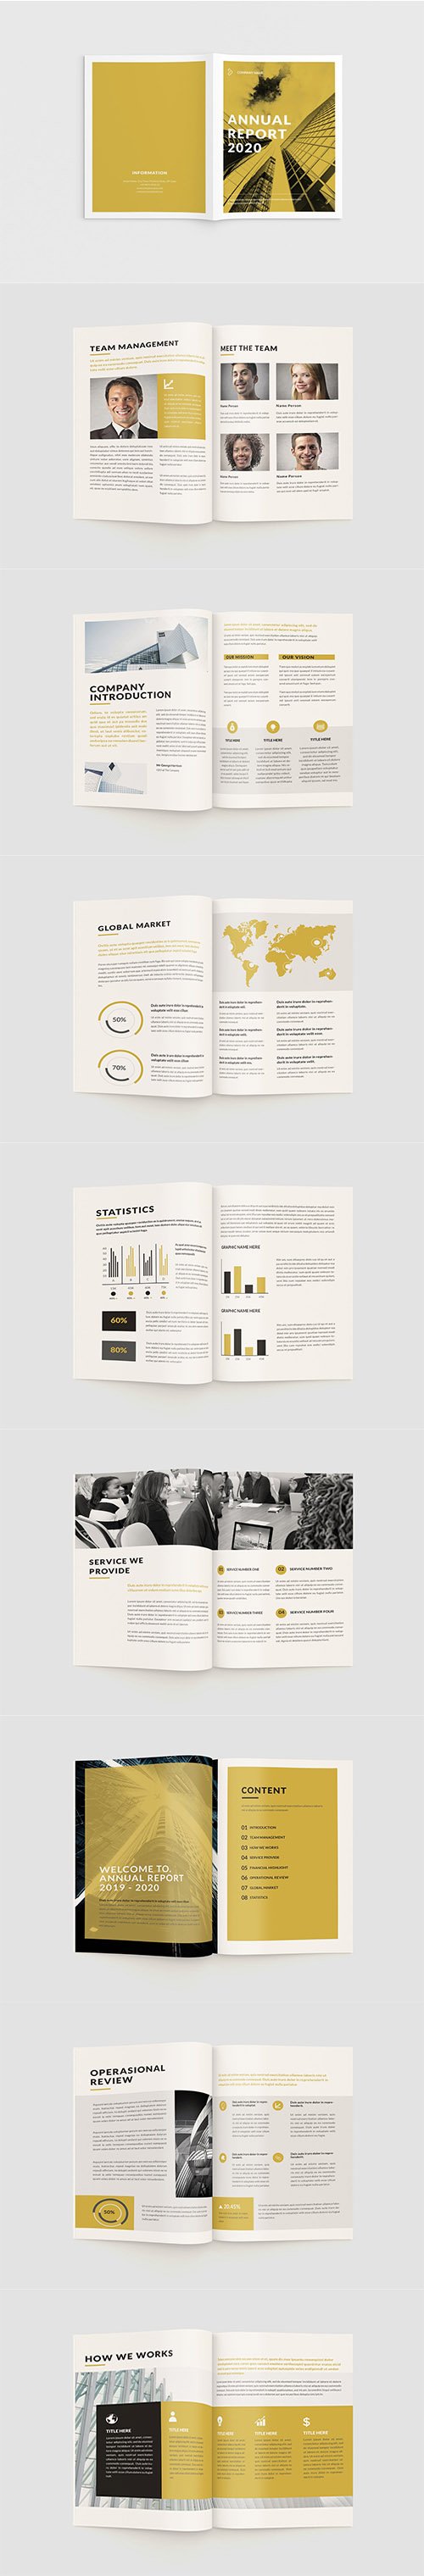 Yellow Annual Report 2020